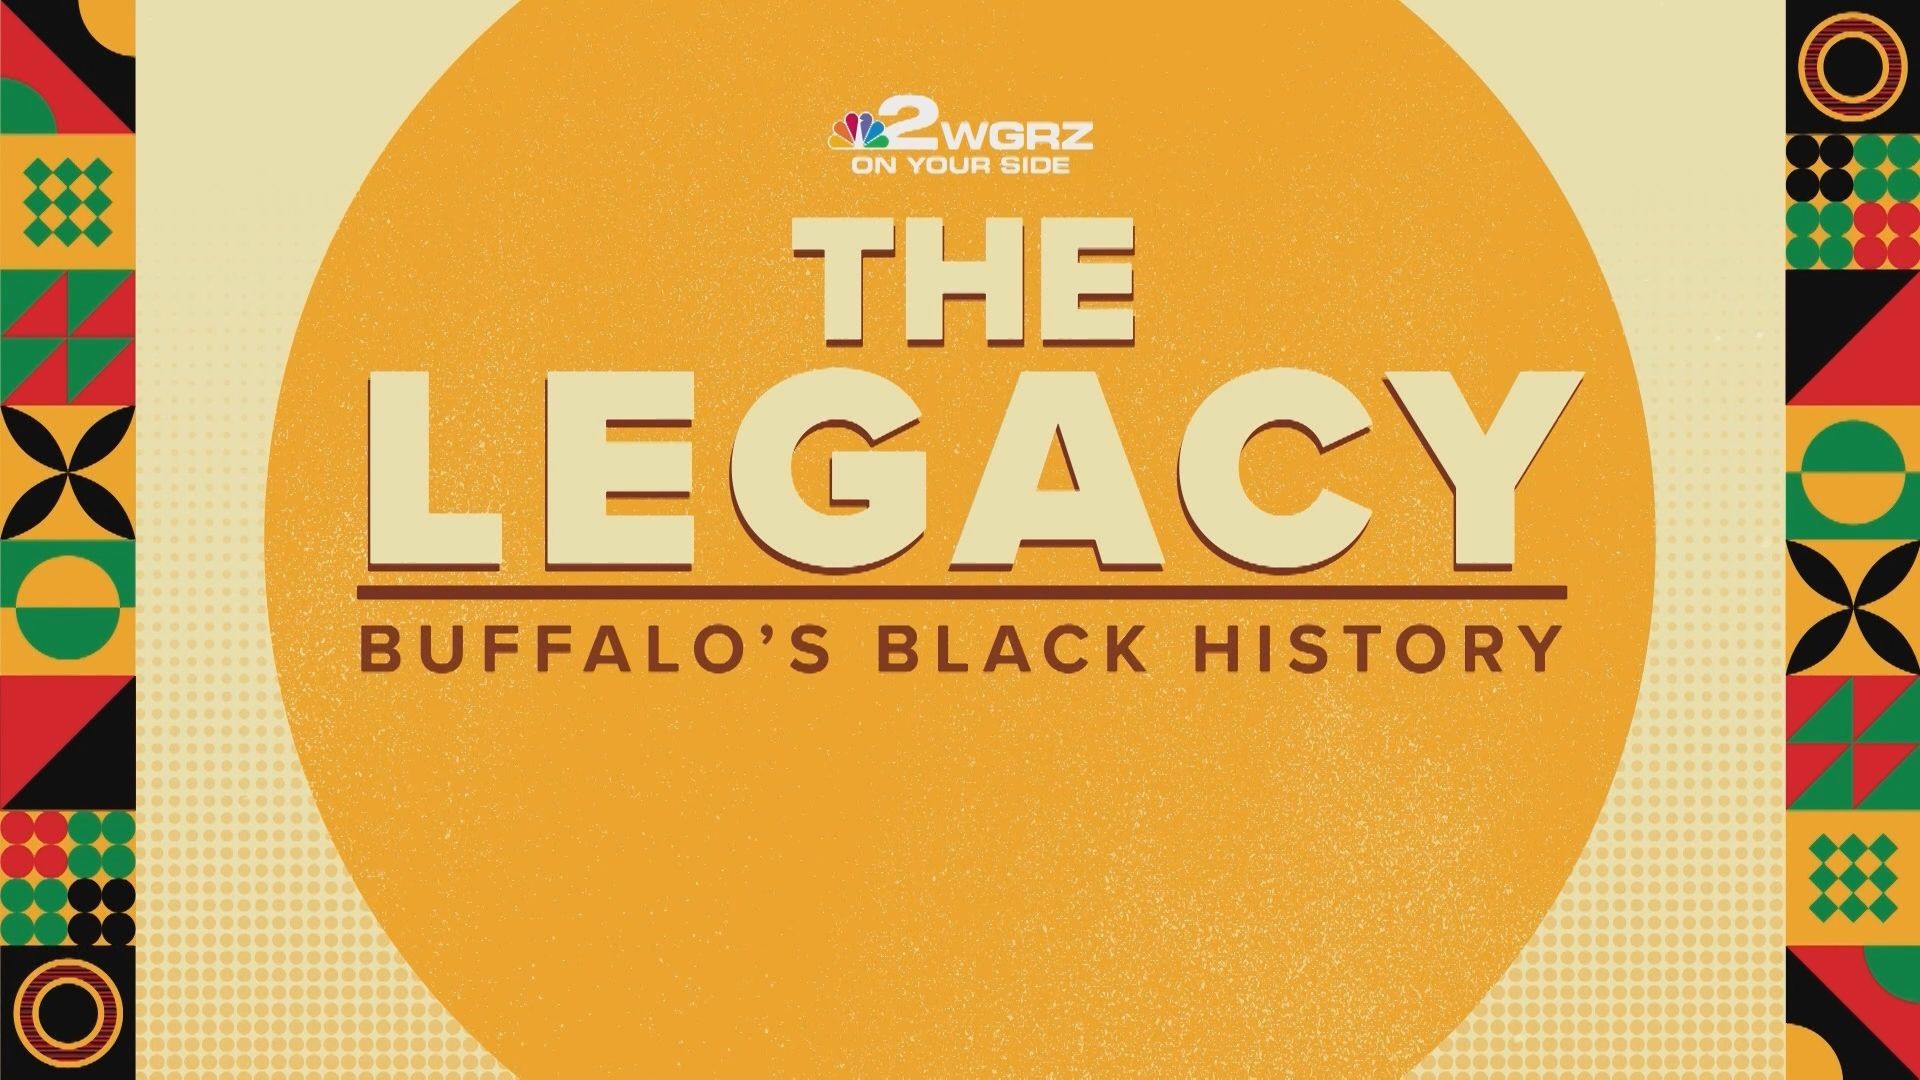 As WNY recognizes Black History Month, 2 on Your Side and Claudine Ewing celebrate the past, present and pride of Buffalo’s Black History and its legacy.